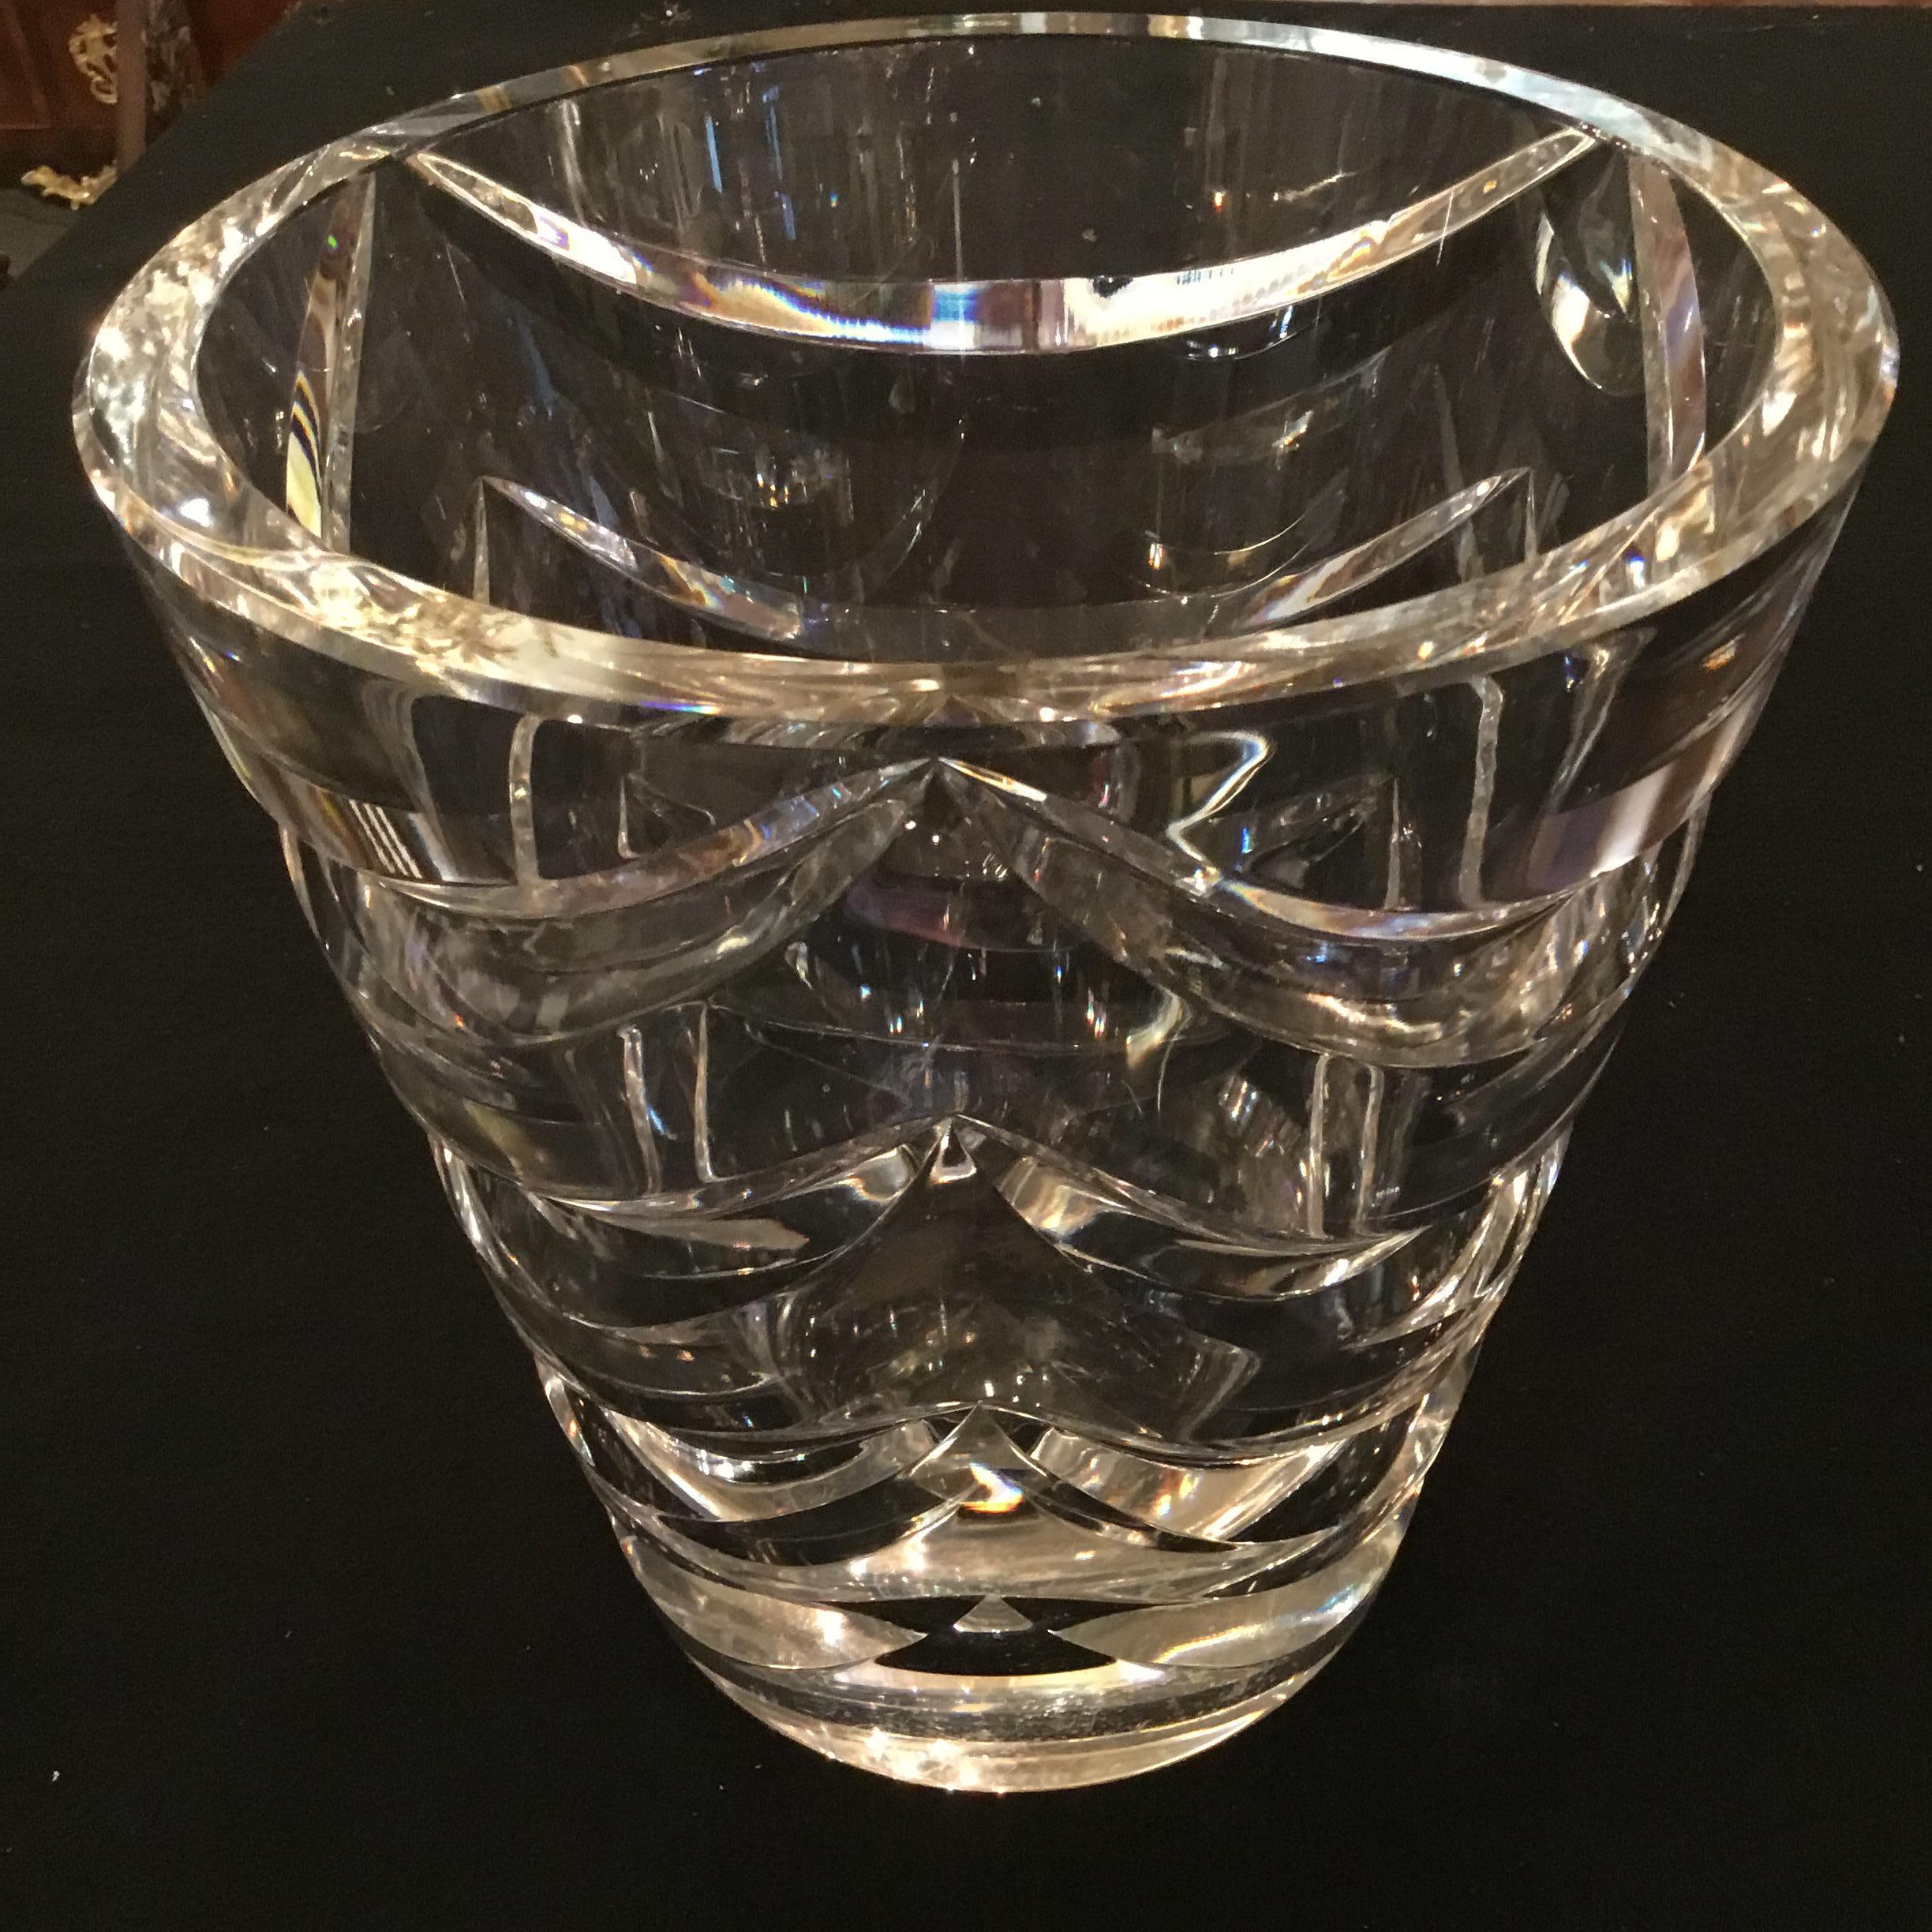 Very clear and brilliant crystal by renowned maker Val St. Lambert.
This piece is signed with an etched signature on the bottom of this
piece. The company was established in 1826 and is known for exceptional
quality in crystal.